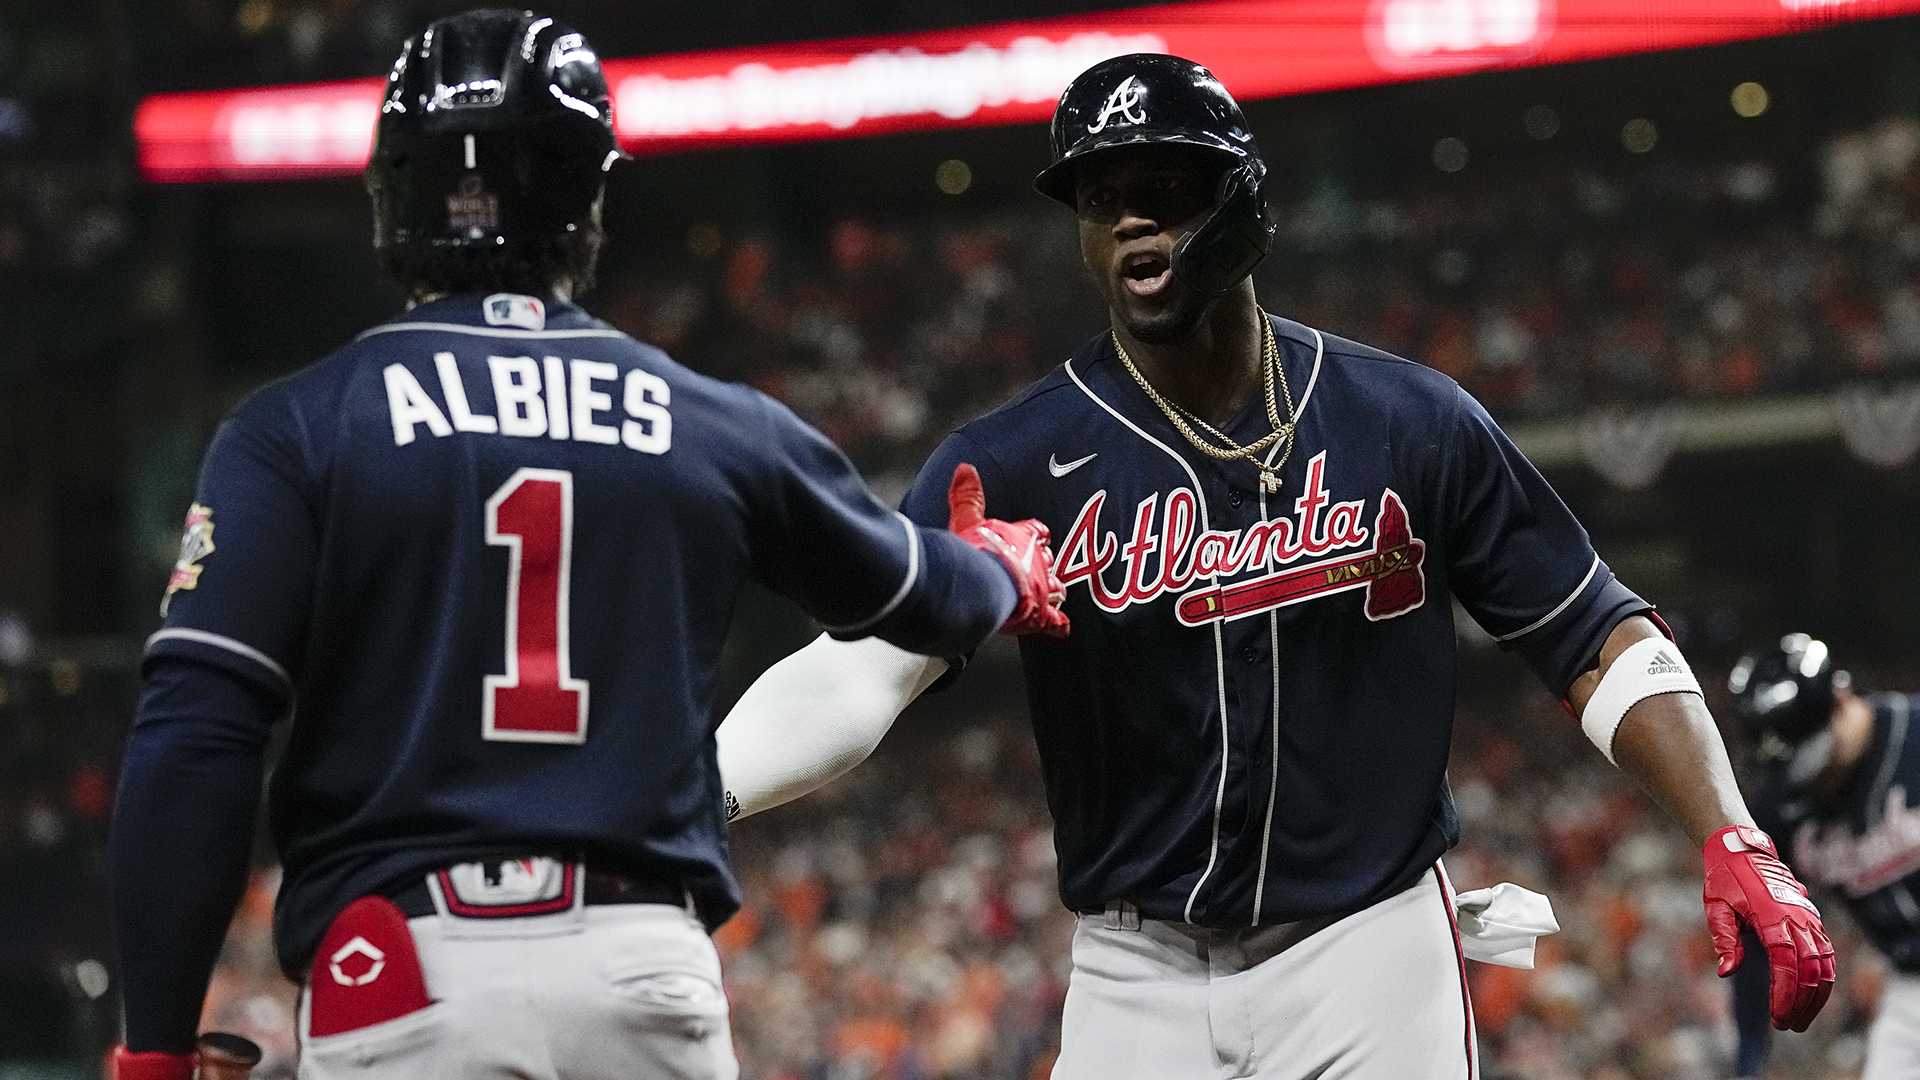 Braves vs Astros: 2021 World Series pits father versus son